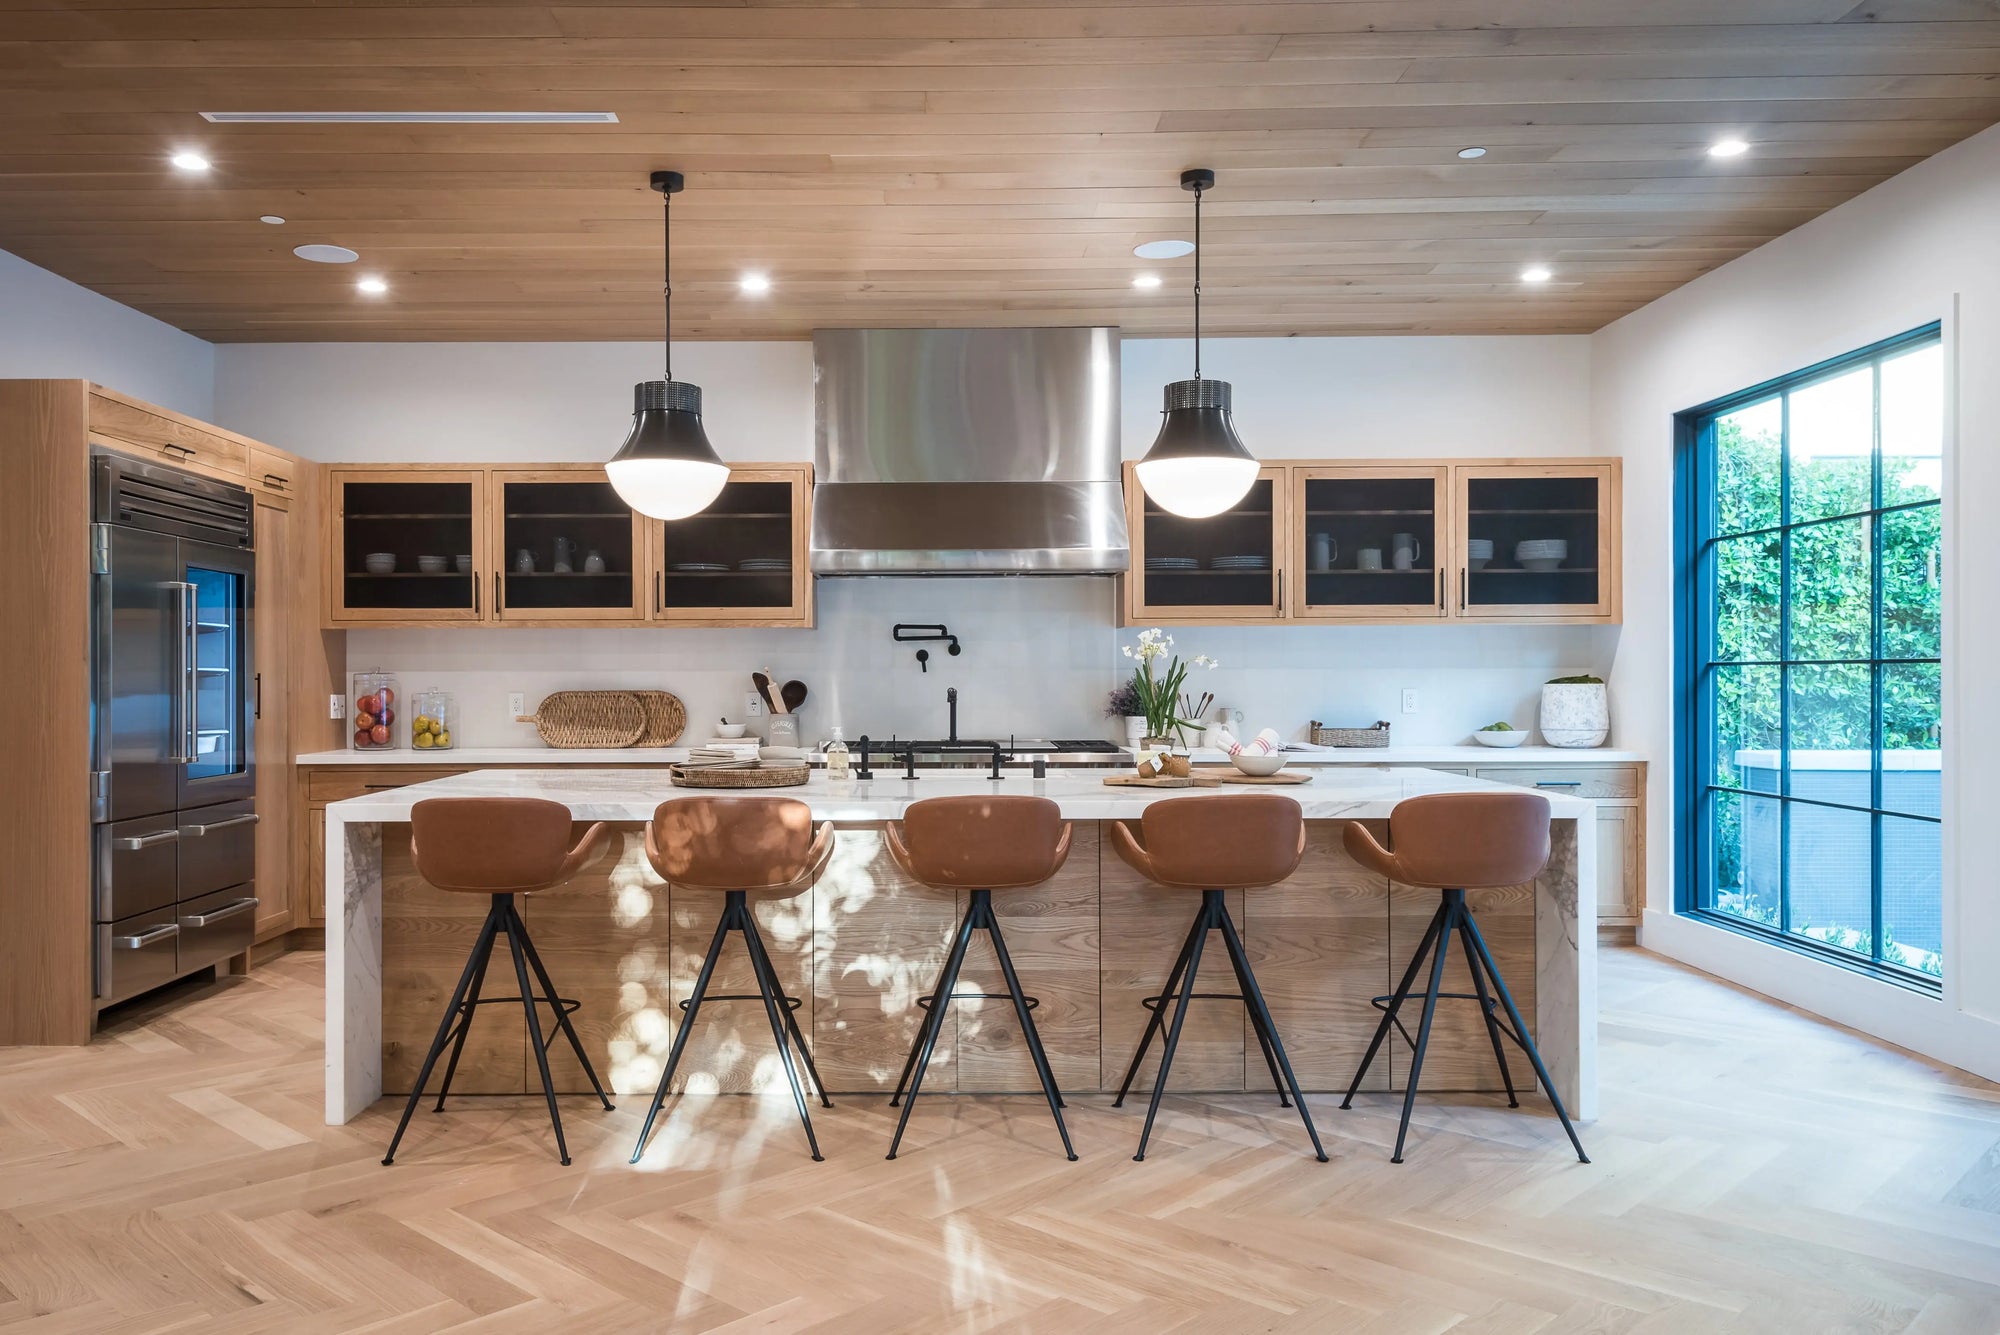 Kitchen 101: PoM's Tips for Adding Personality